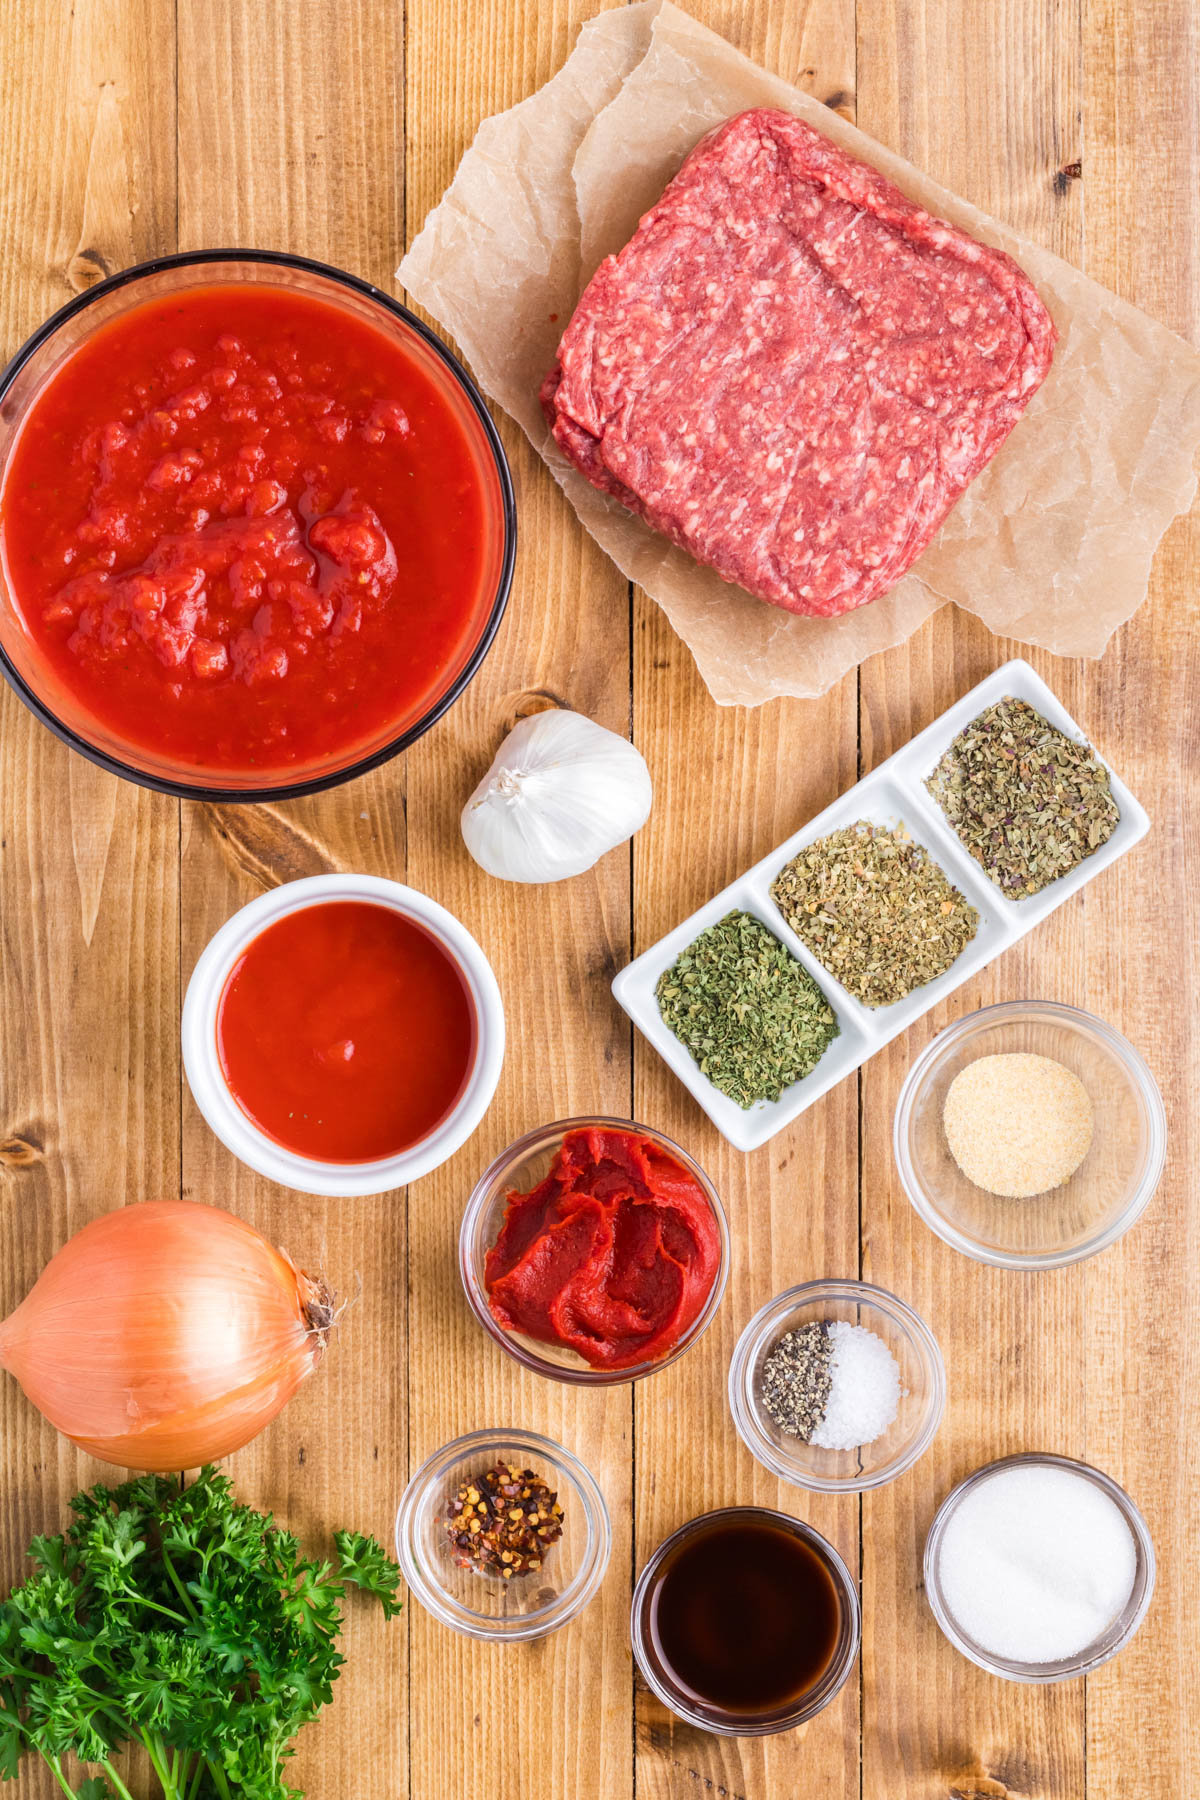 Homemade meat sauce ingredients.